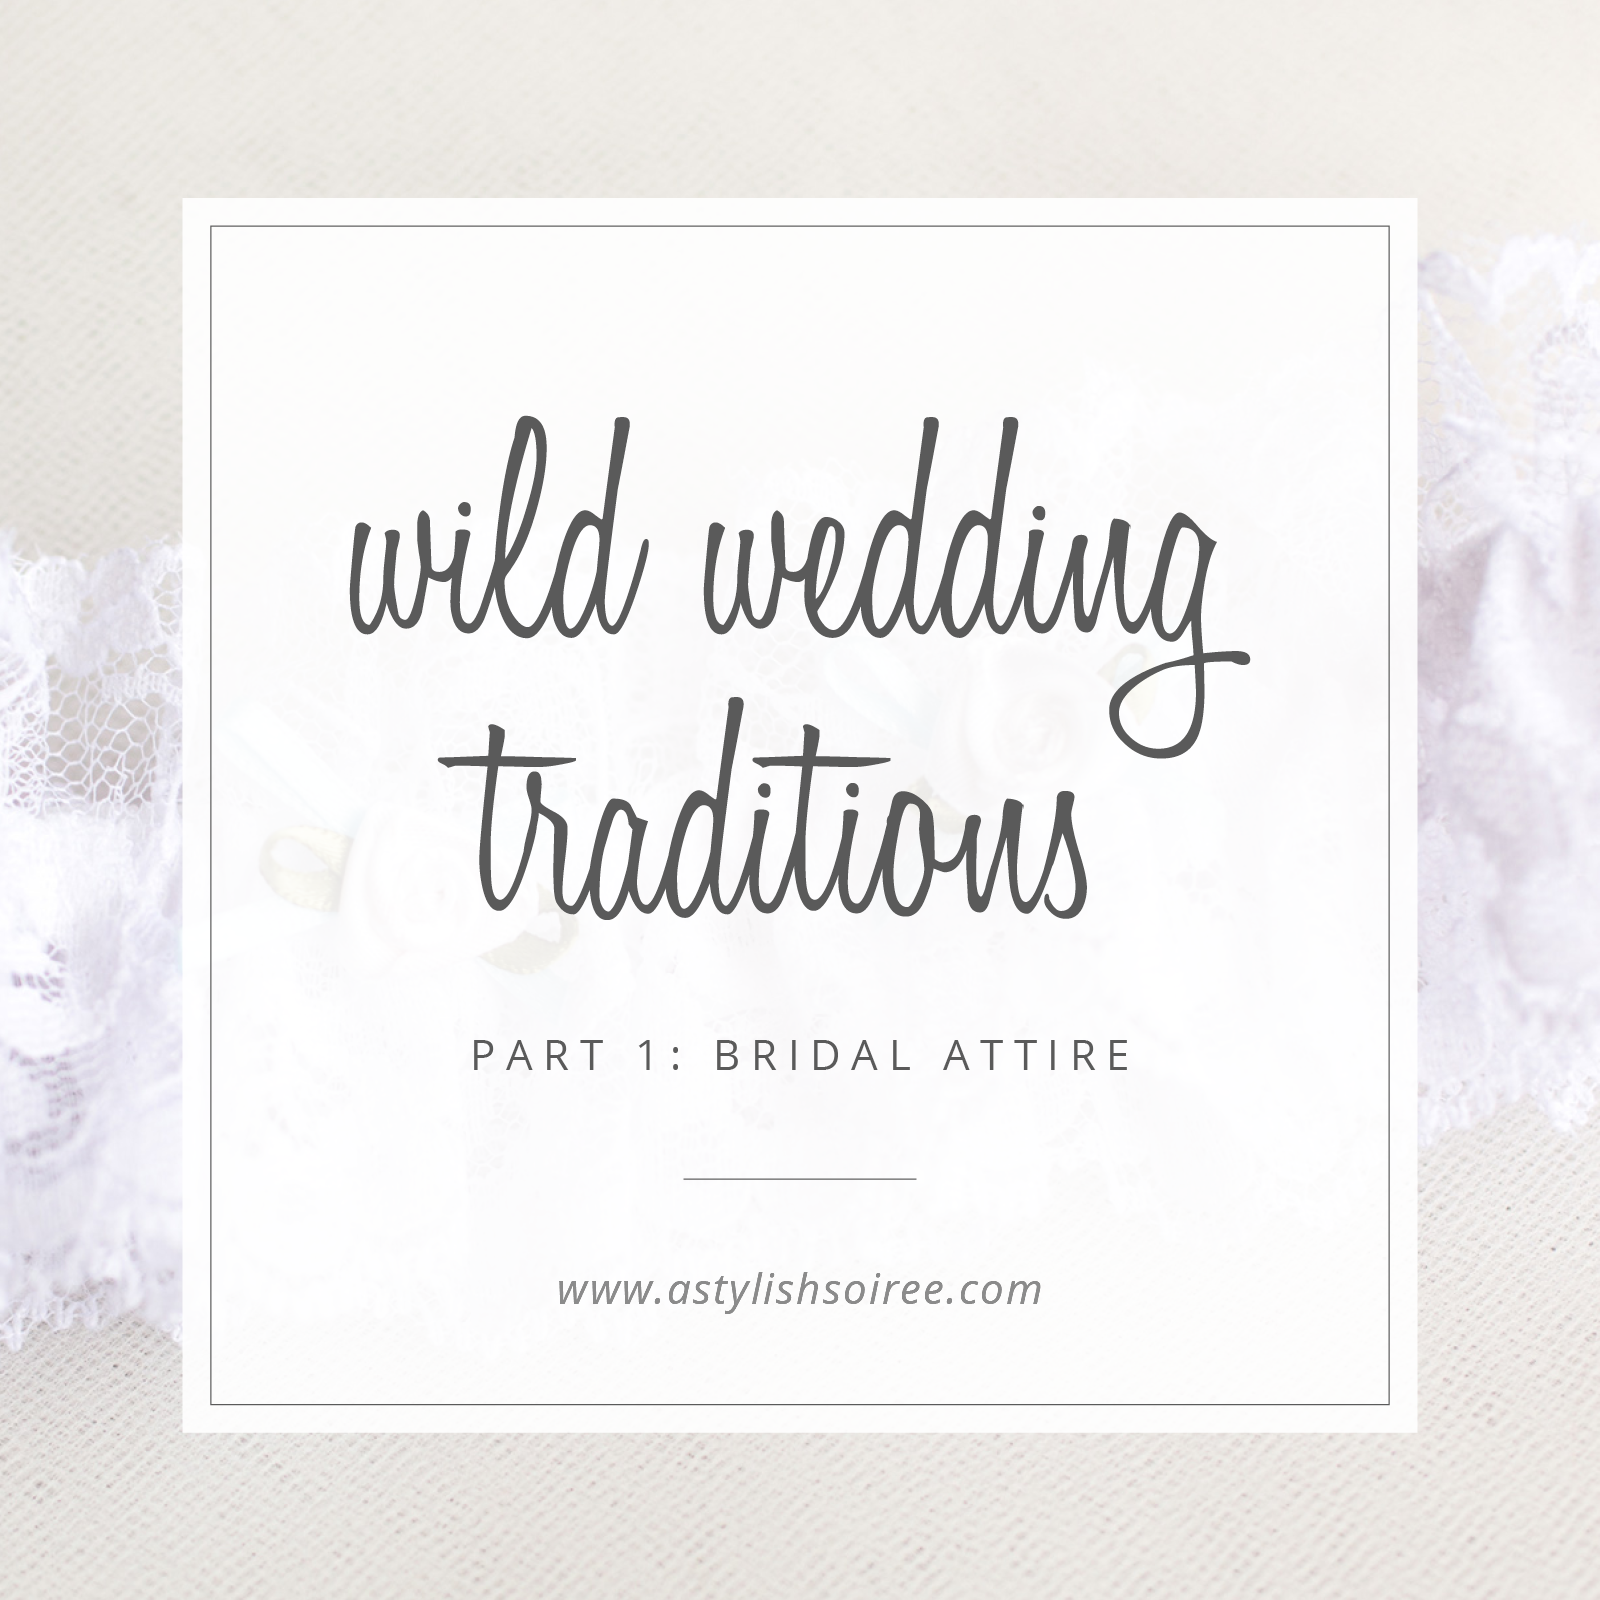 Wedding Traditions: The Bizarre and Wild History! A Stylish Soiree